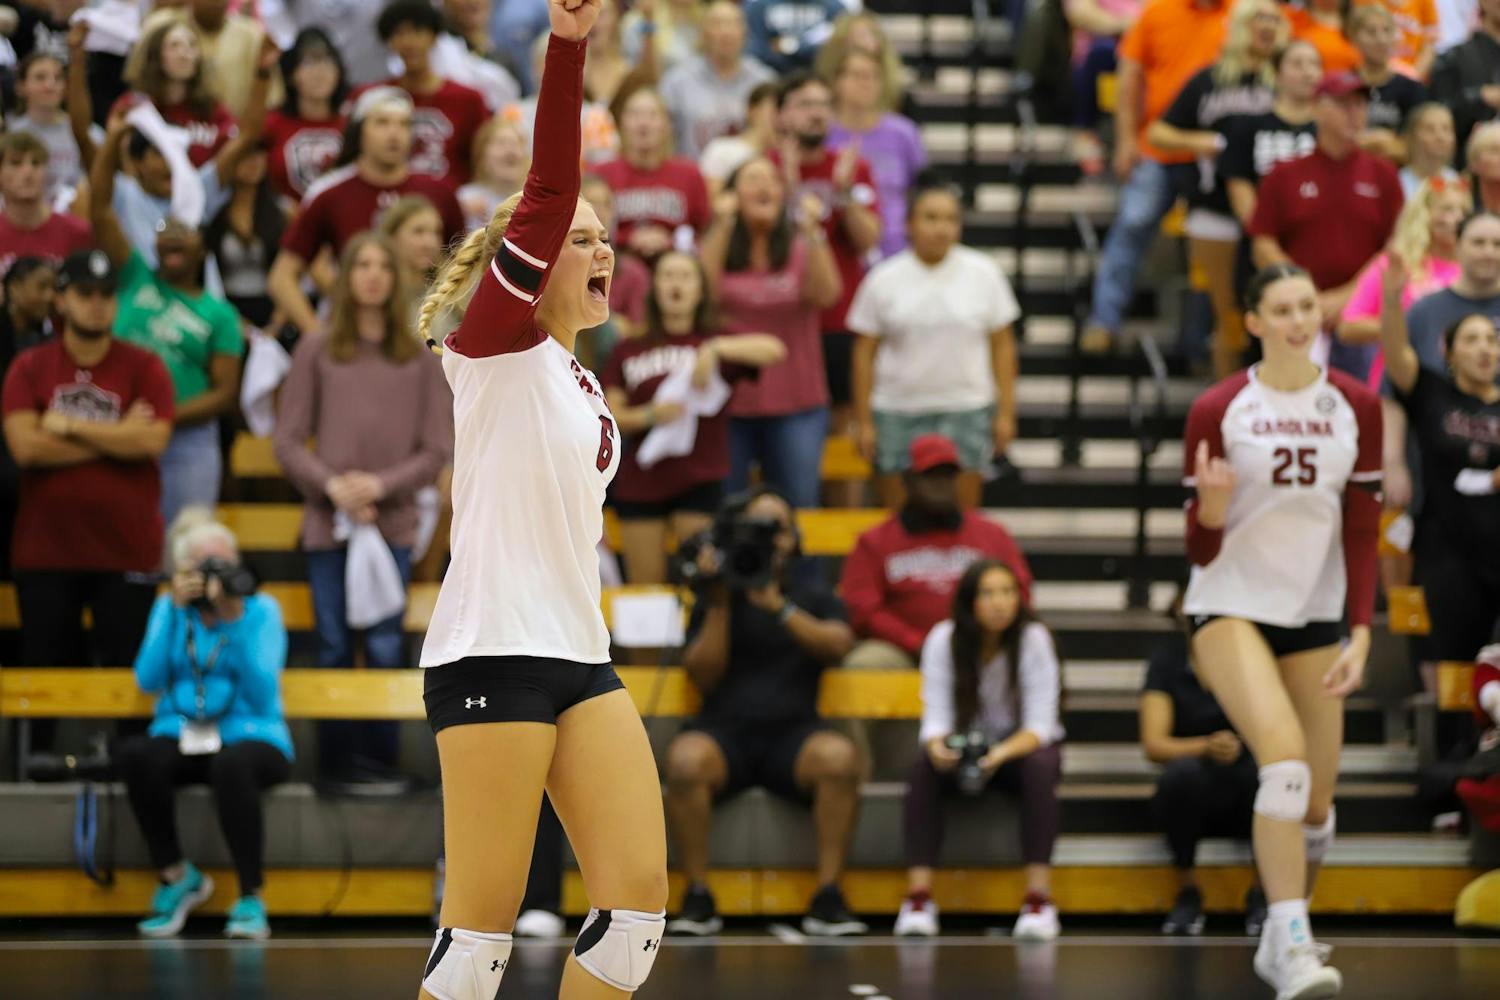 Freshman setter Sydney Floyd celebrates earning a point on Aug. 30, 2023. The South Carolina Gamecocks beat the Clemson Tigers 3-1 in the Palmetto Series game.